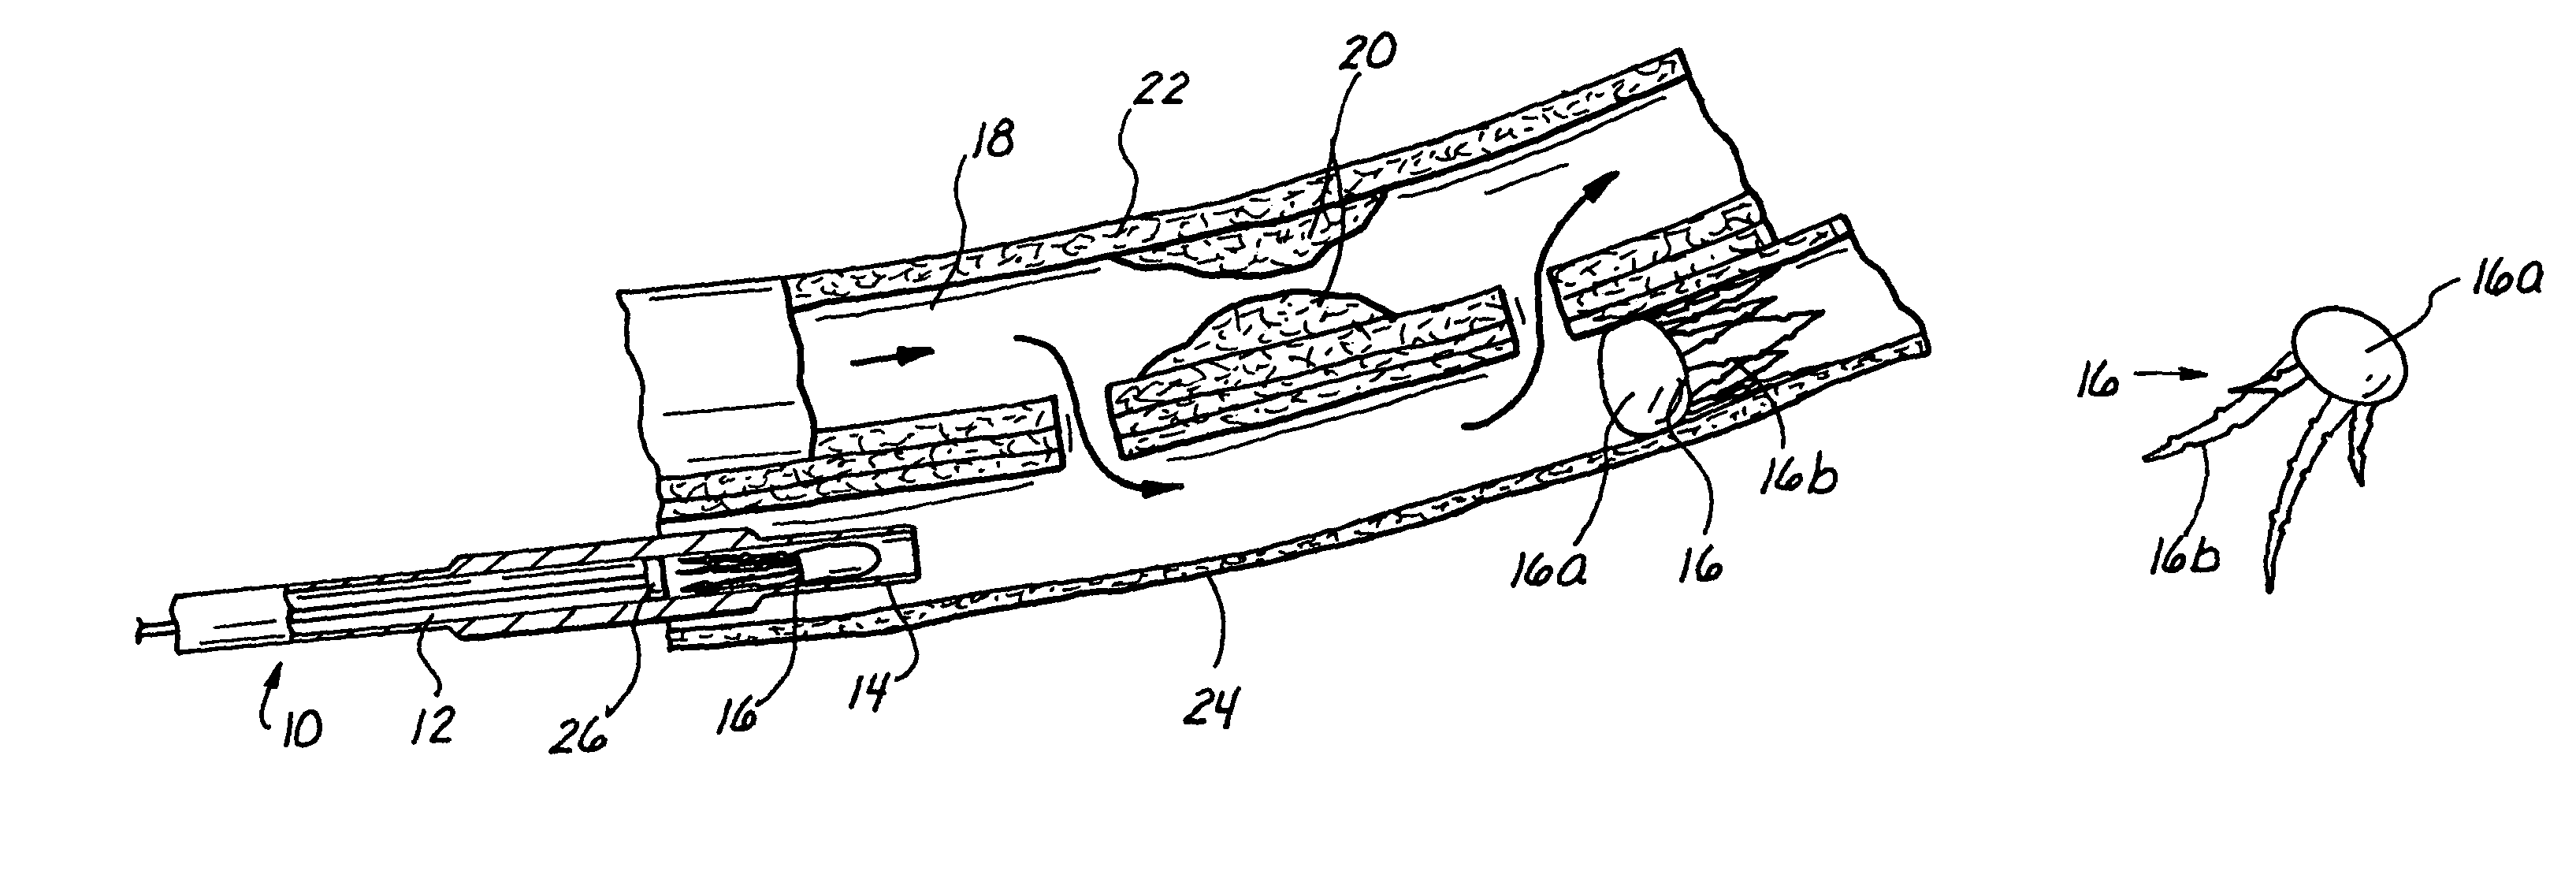 Methods and apparatus for blocking flow through blood vessels